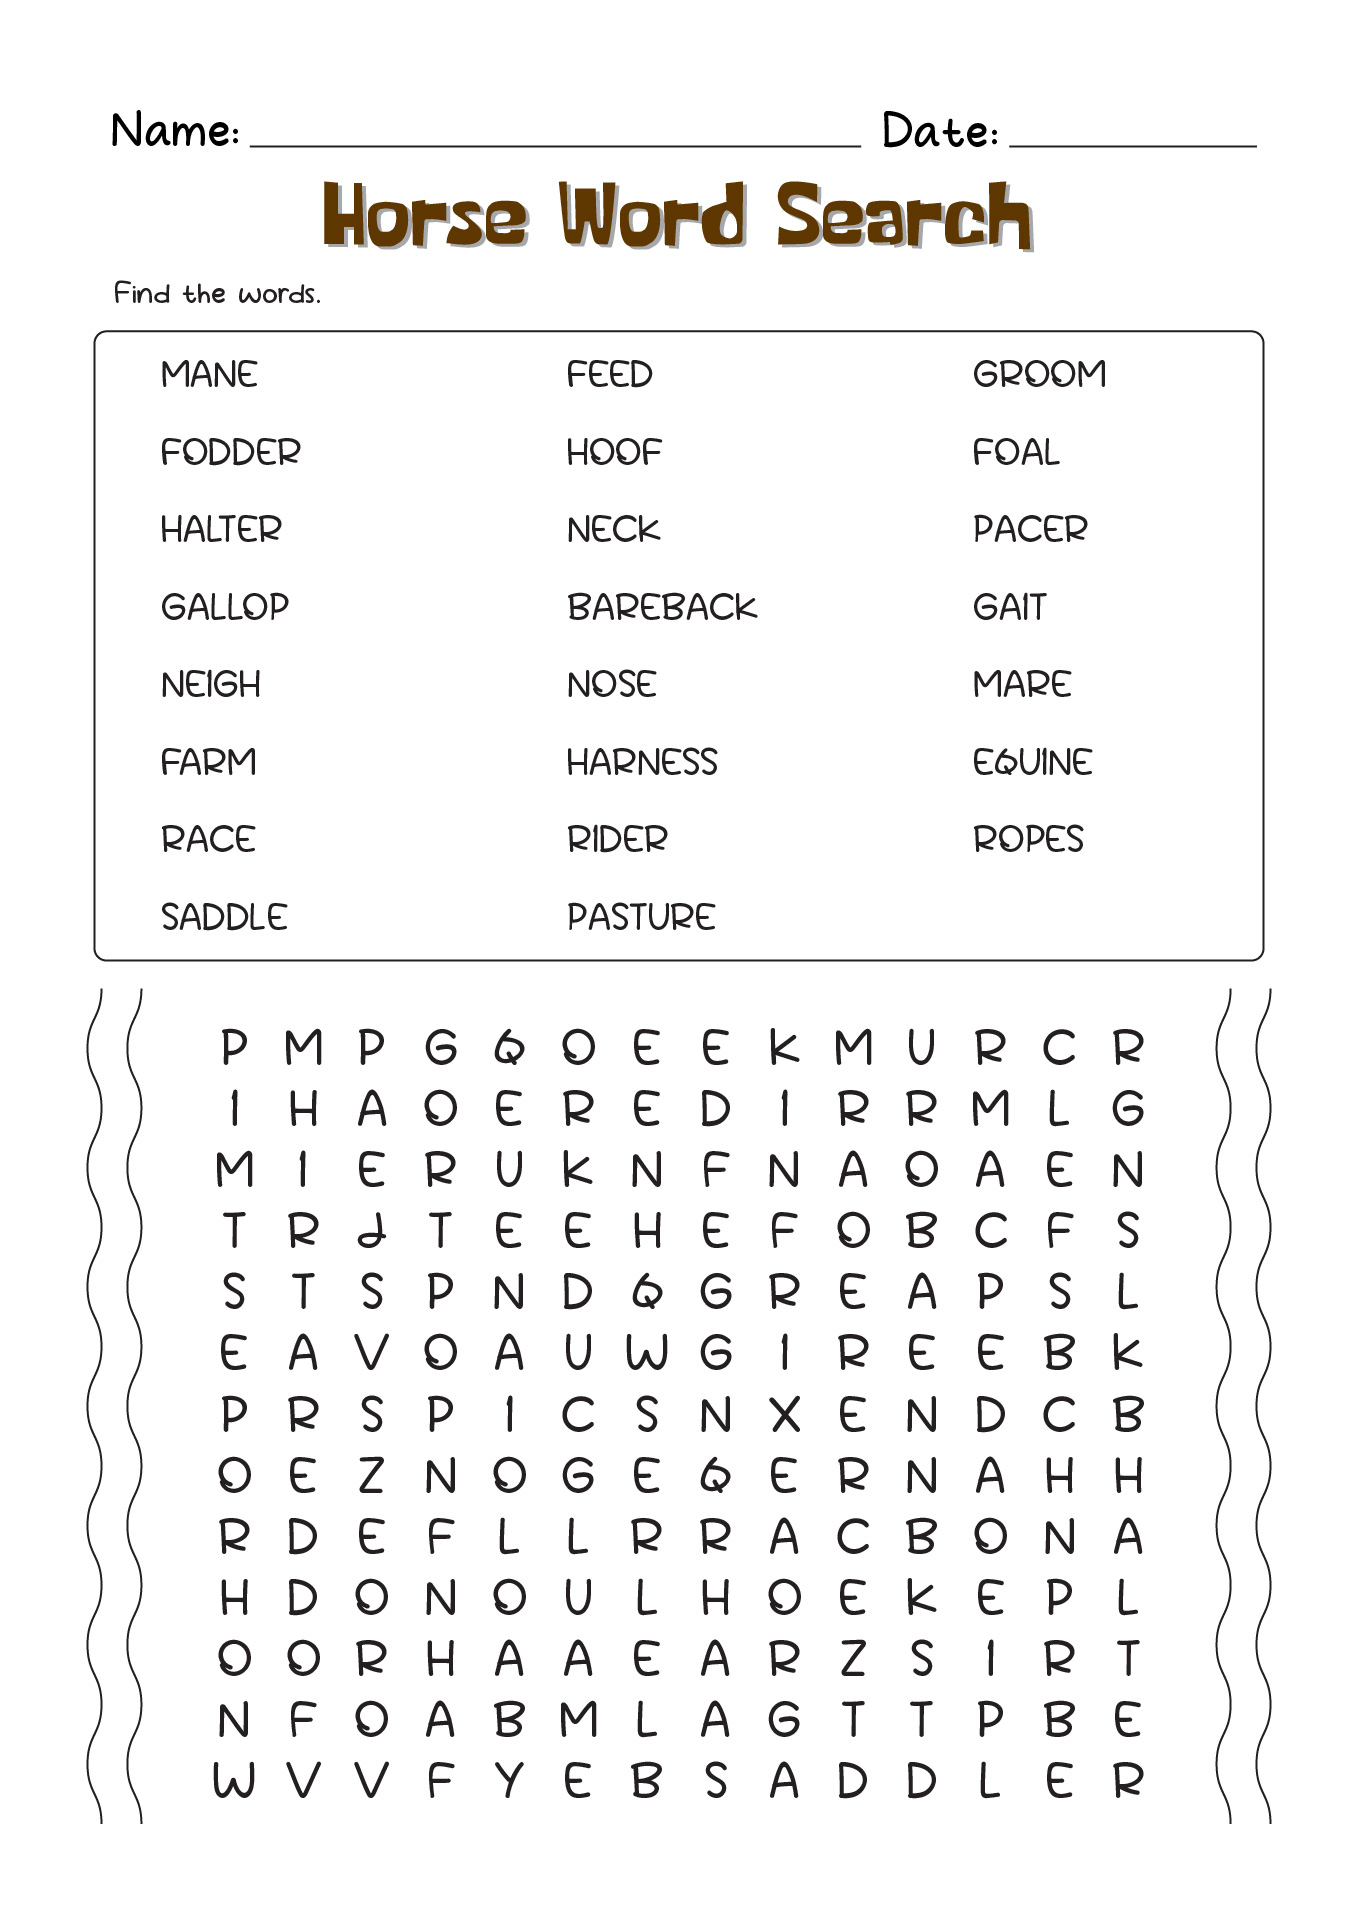 Word Search Printable Horse Activity Sheet